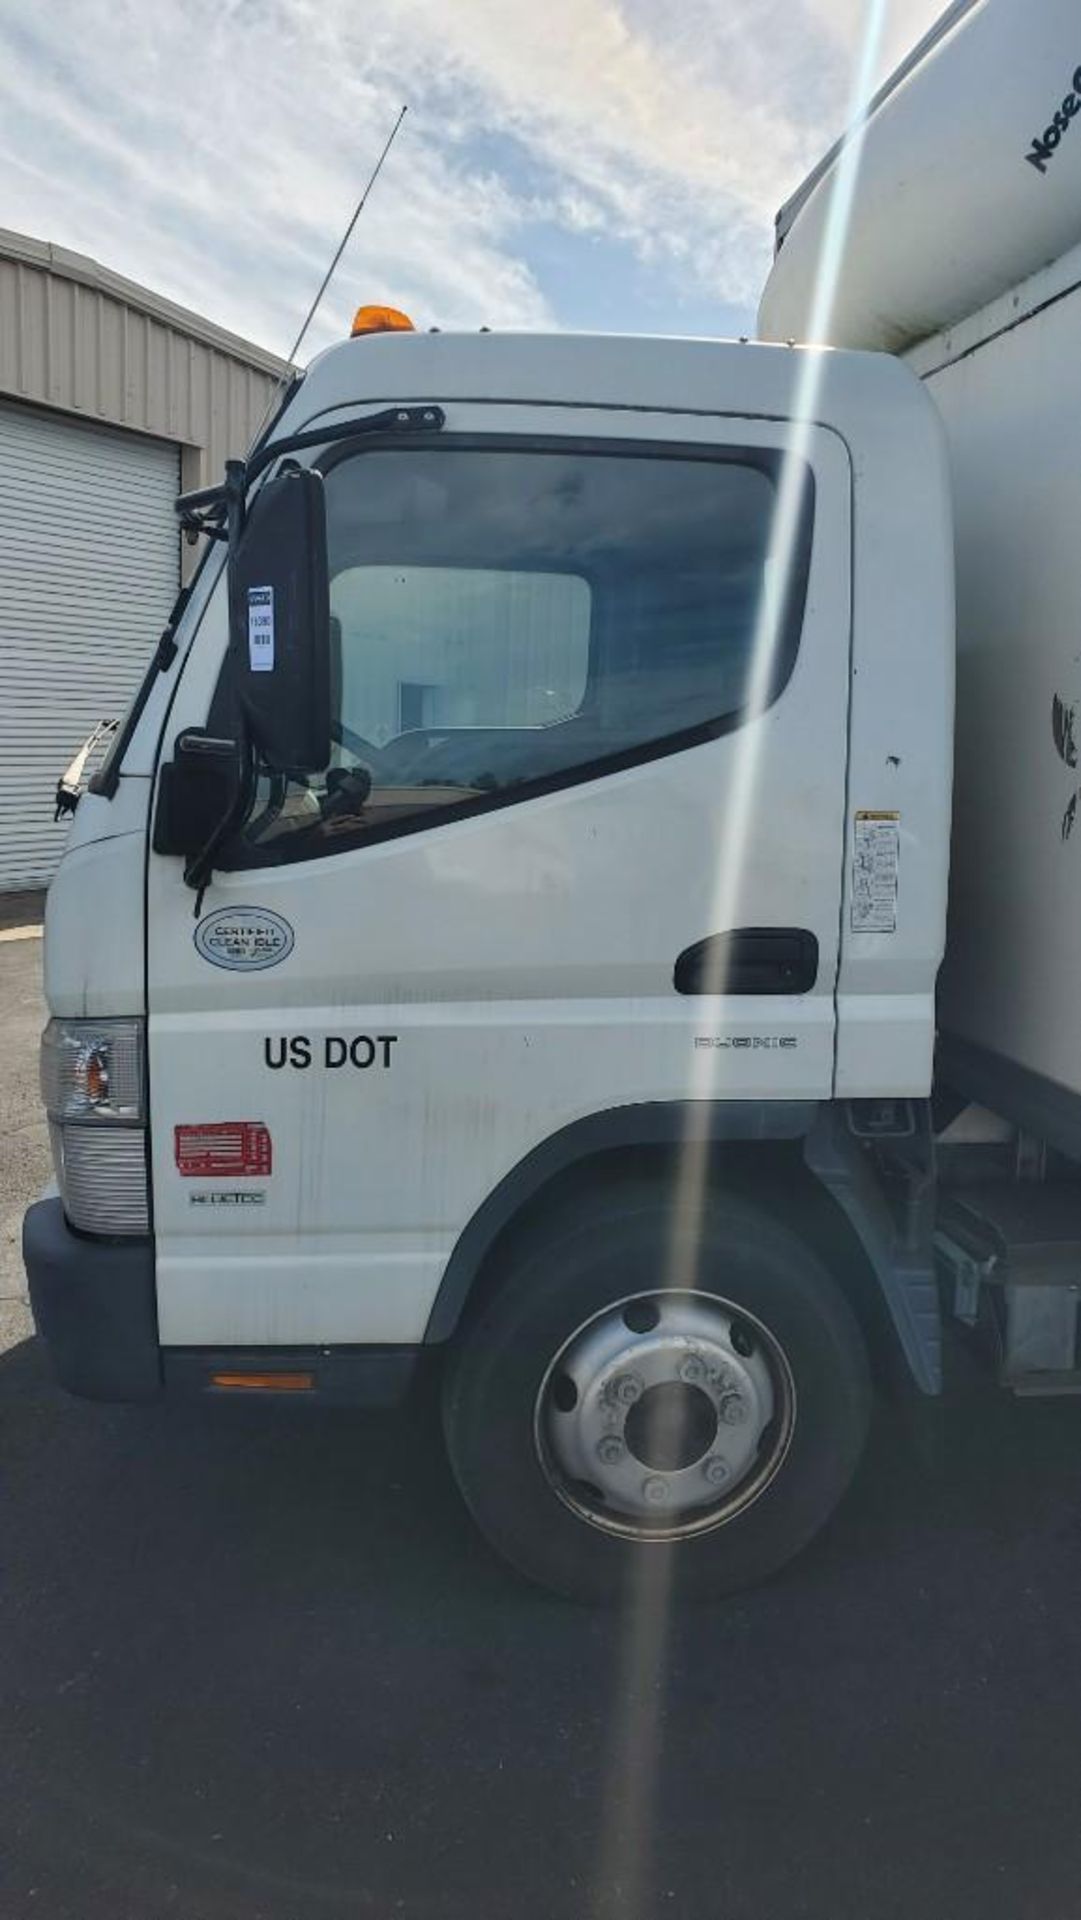 2015 MITSUBISHI FUSO FE180 BOX TRUCK APPROX 14' BOX, DIESEL ENGINE, AUTOMATIC TRANSMISSION - Image 9 of 39